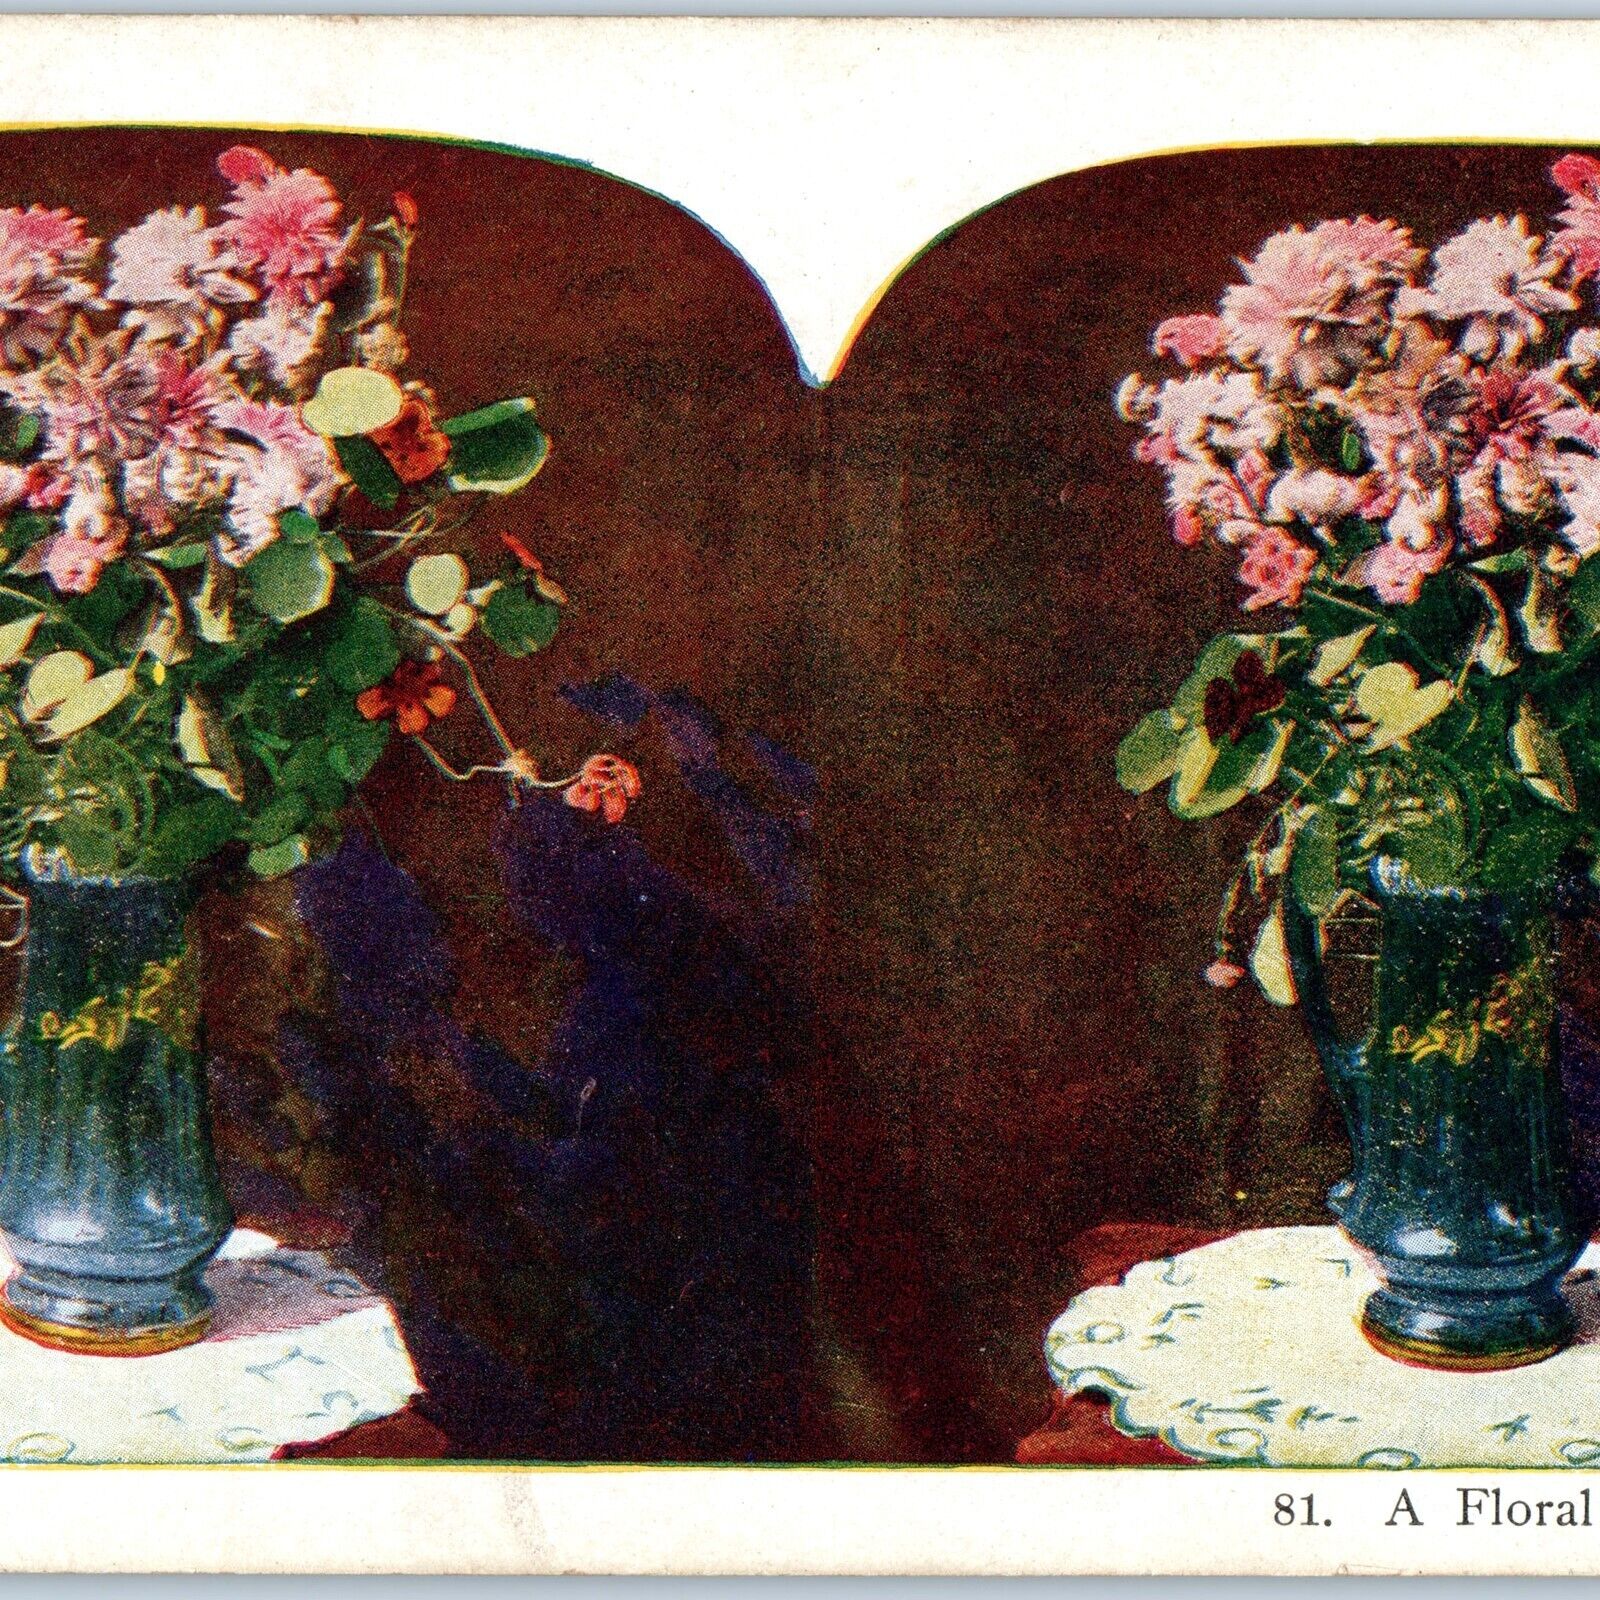 c1900s A Floral Offering Vase Lovely Flowers Artistic Stereoview Litho Photo V37